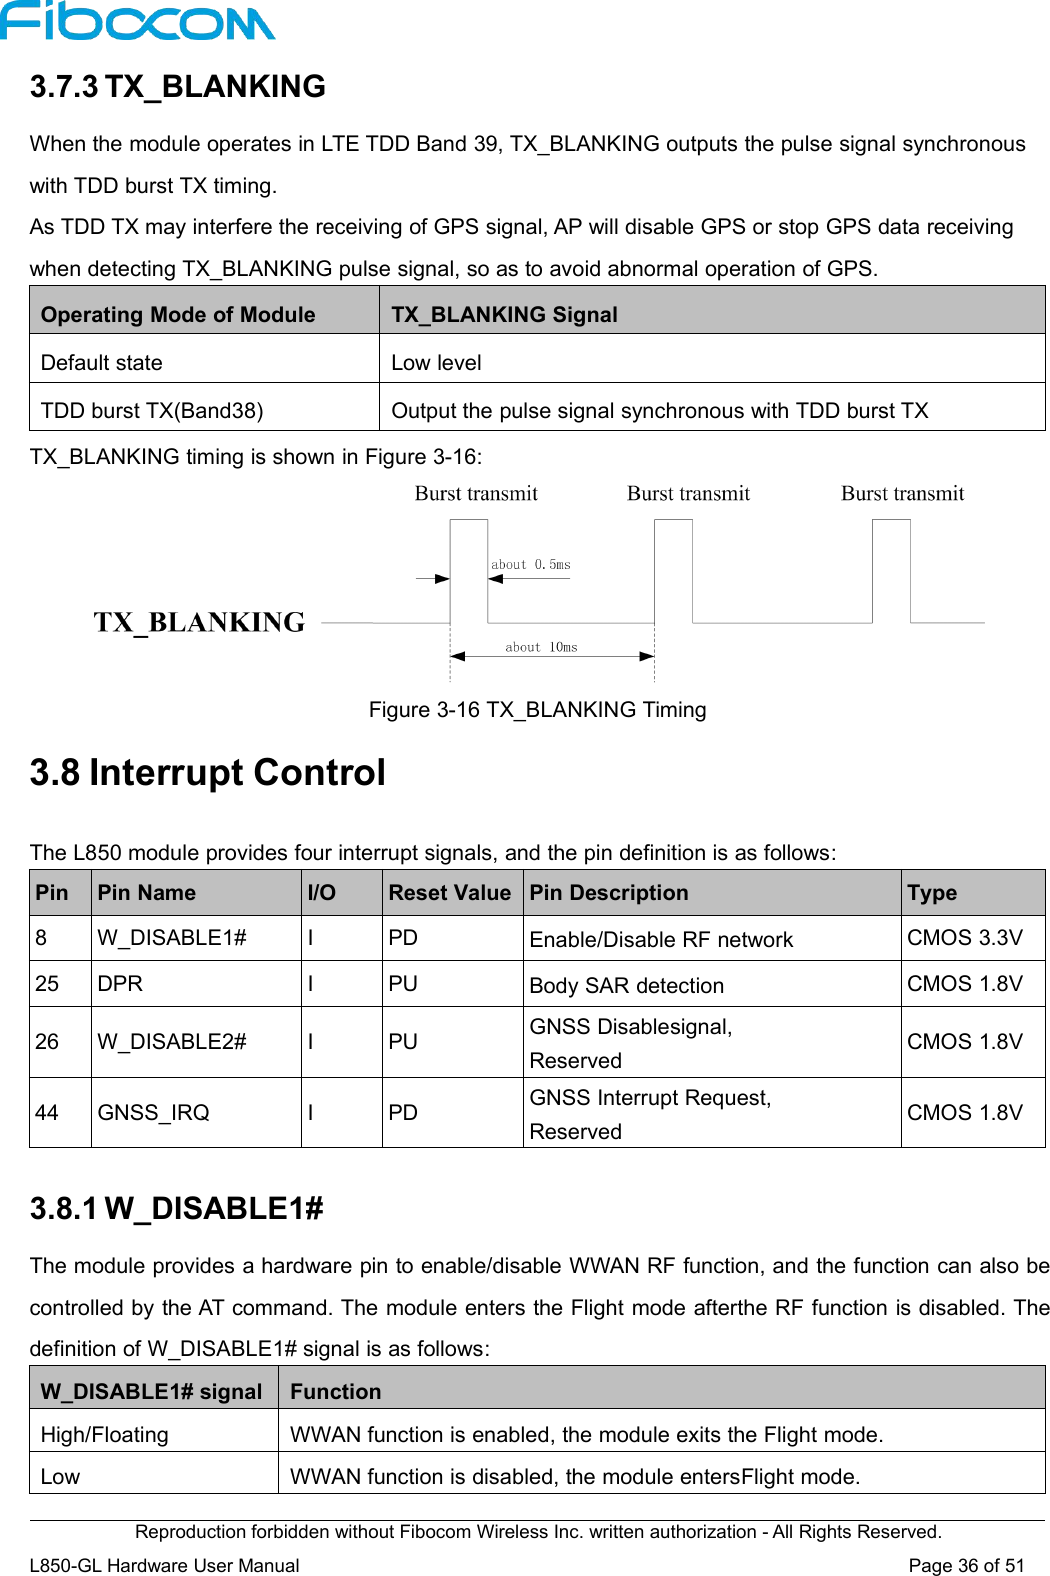 Reproduction forbidden without Fibocom Wireless Inc. written authorization - All Rights Reserved.L850-GL Hardware User Manual Page36of513.7.3 TX_BLANKINGWhen the module operates in LTE TDD Band 39, TX_BLANKING outputs the pulse signal synchronouswith TDD burst TX timing.As TDD TX may interfere the receiving of GPS signal, AP will disable GPS or stop GPS data receivingwhen detecting TX_BLANKING pulse signal, so as to avoid abnormal operation of GPS.Operating Mode of ModuleTX_BLANKING SignalDefault stateLow levelTDD burst TX(Band38)Output the pulse signal synchronous with TDD burst TXTX_BLANKING timing is shown in Figure 3-16:Figure 3-16 TX_BLANKING Timing3.8 Interrupt ControlThe L850 module provides four interrupt signals, and the pin definition is as follows:PinPin NameI/OReset ValuePin DescriptionType8W_DISABLE1#IPDEnable/Disable RF networkCMOS 3.3V25DPRIPUBody SAR detectionCMOS 1.8V26W_DISABLE2#IPUGNSS Disablesignal,ReservedCMOS 1.8V44GNSS_IRQIPDGNSS Interrupt Request,ReservedCMOS 1.8V3.8.1 W_DISABLE1#The module provides a hardware pin to enable/disable WWAN RF function, and the function can also becontrolled by the AT command. The module enters the Flight mode afterthe RF function is disabled. Thedefinition of W_DISABLE1# signal is as follows:W_DISABLE1# signalFunctionHigh/FloatingWWAN function is enabled, the module exits the Flight mode.LowWWAN function is disabled, the module entersFlight mode.